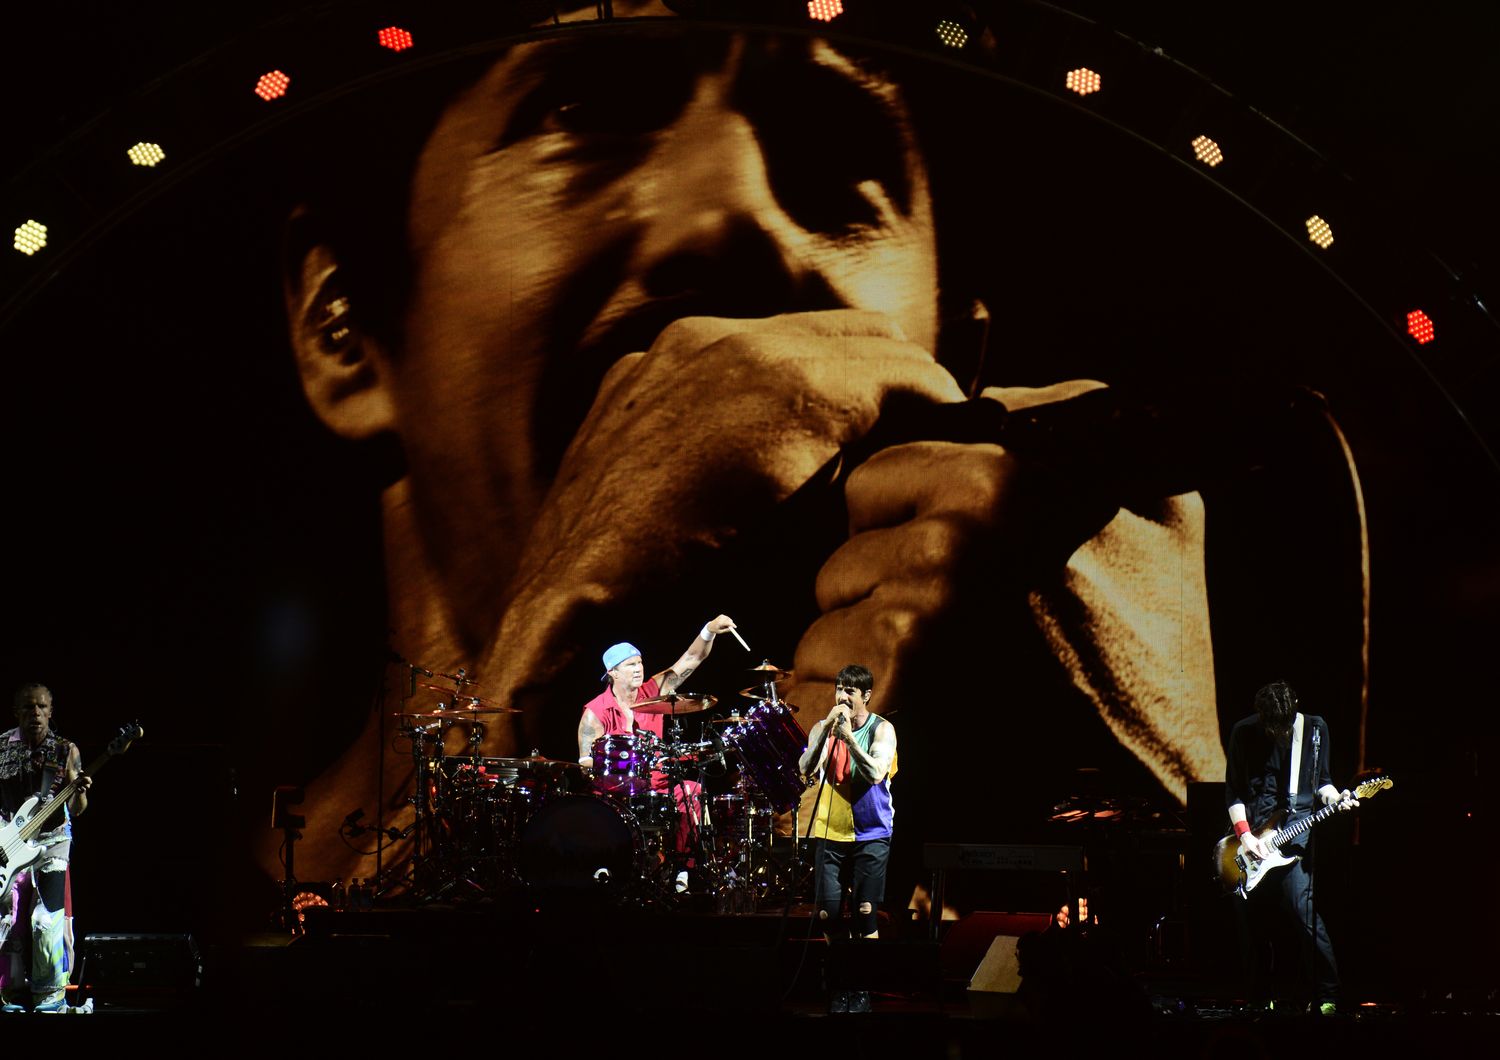 In 30mila a Roma per i Red Hot Chili Peppers in concerto